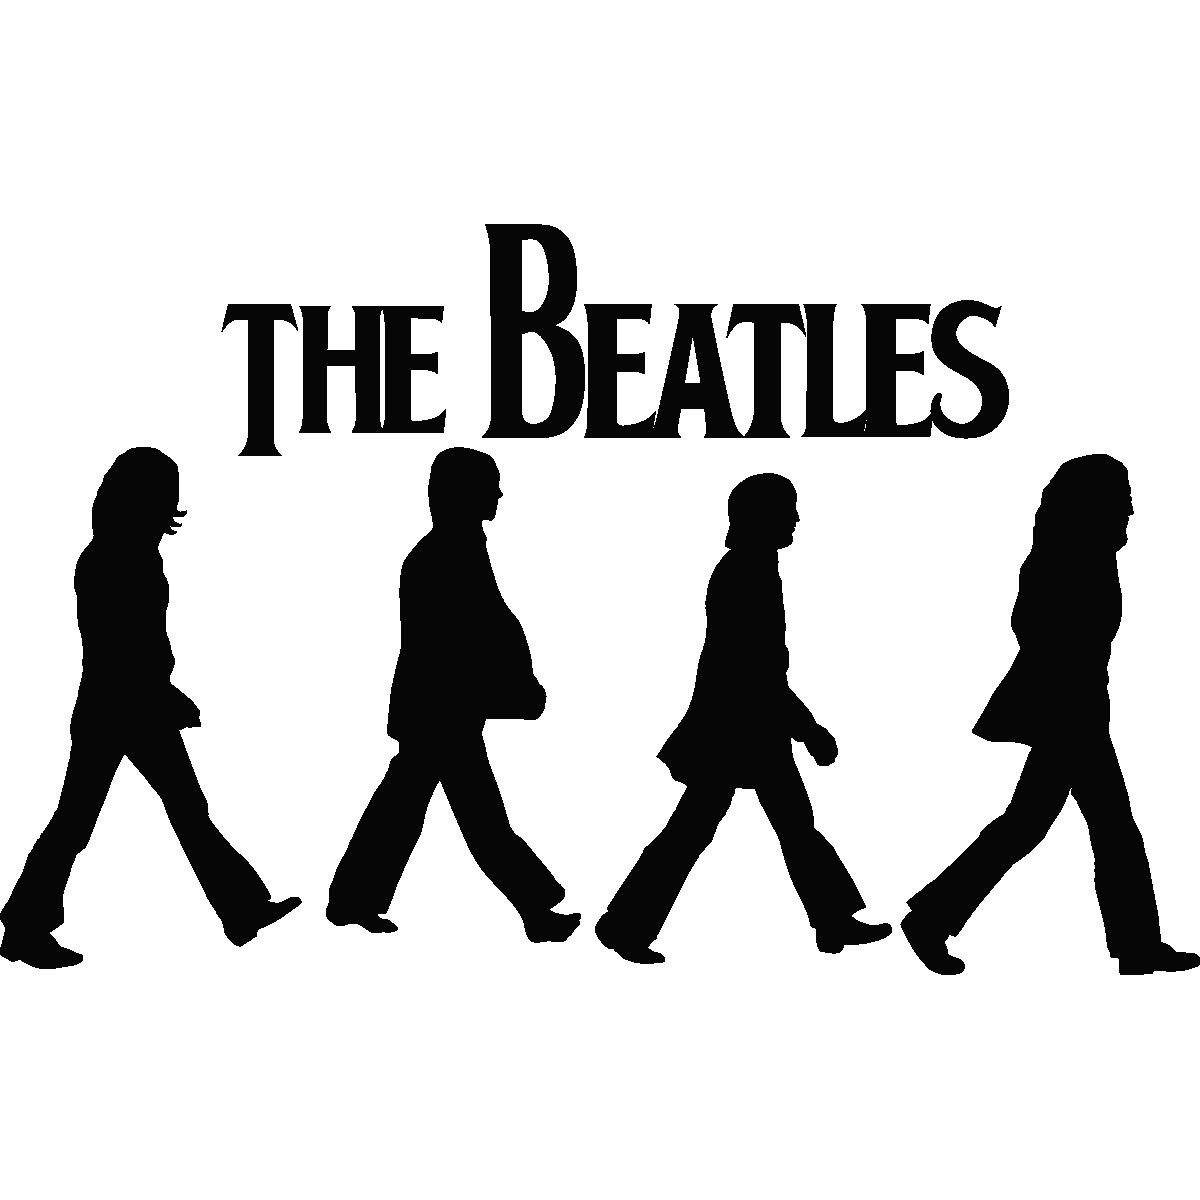 The Beatles Silhouettes on Abbey Road Black and White icons